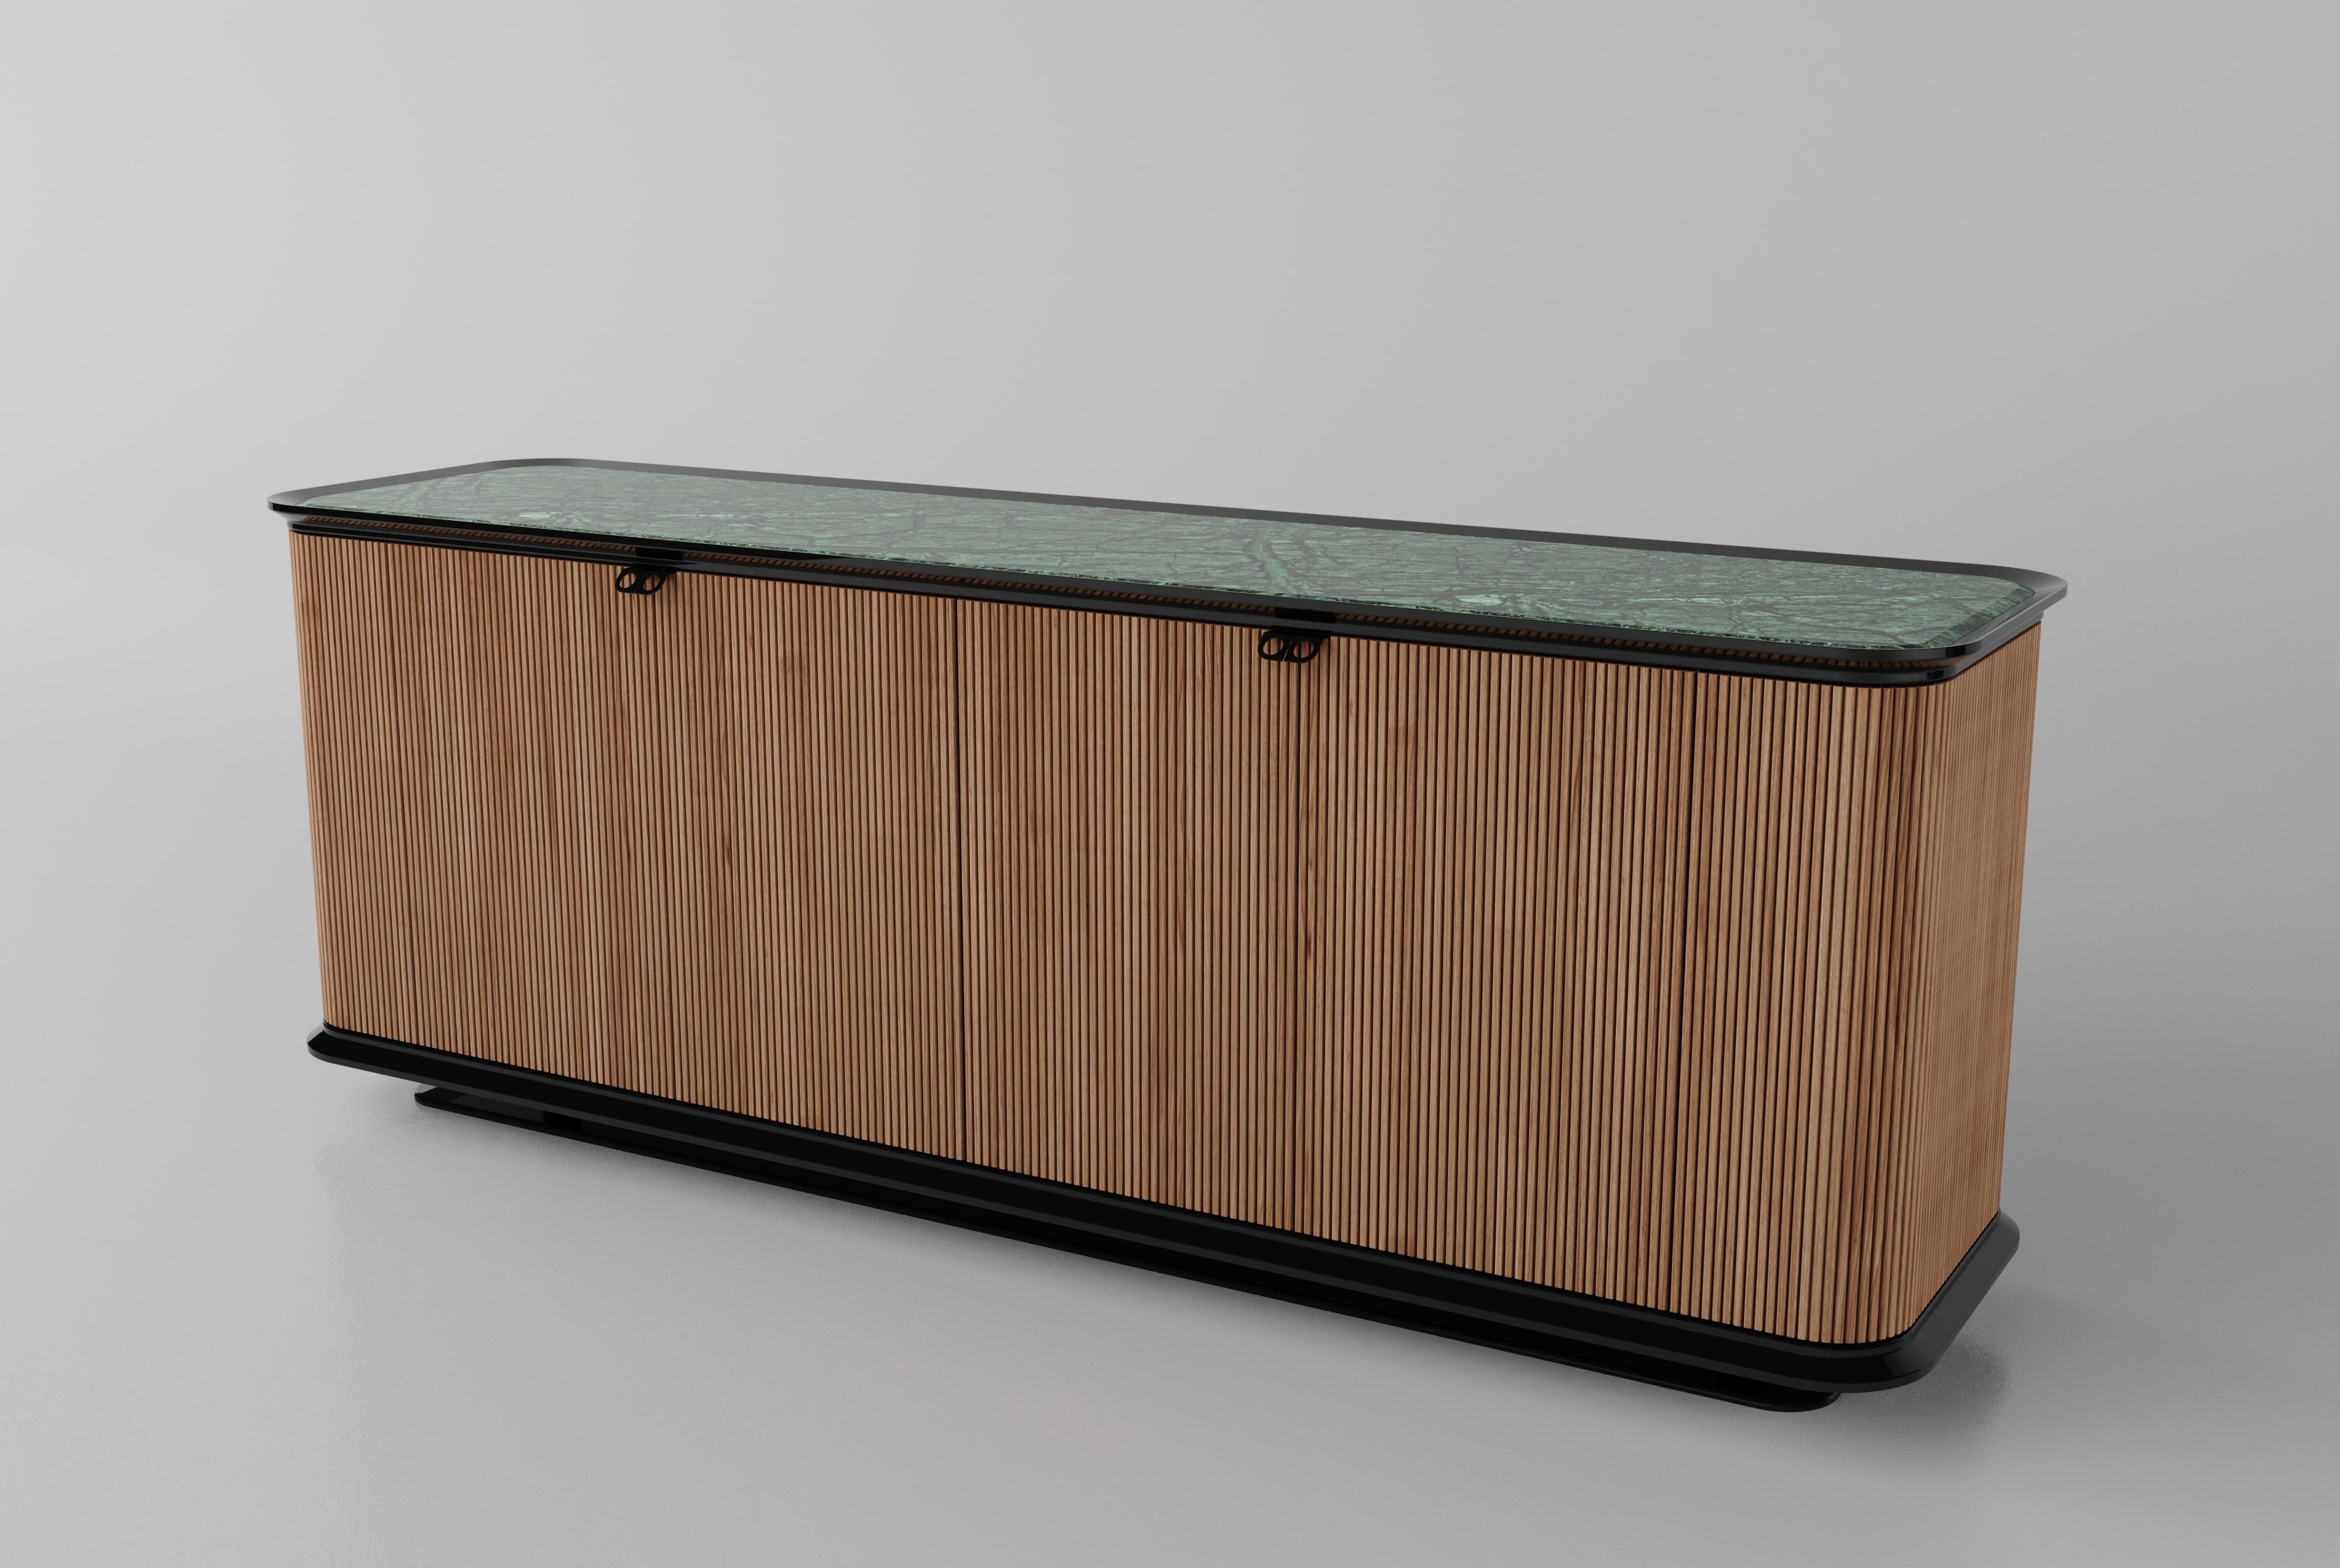 NEMESI #1 is a doble sided wooden sideboard, designed by SAGARÍA

The clean geometry and the authentic eloquence of the material, the solid Canaletto walnut doors mixed with the Calacatta gold marble, are the intrinsic feature that underlines the